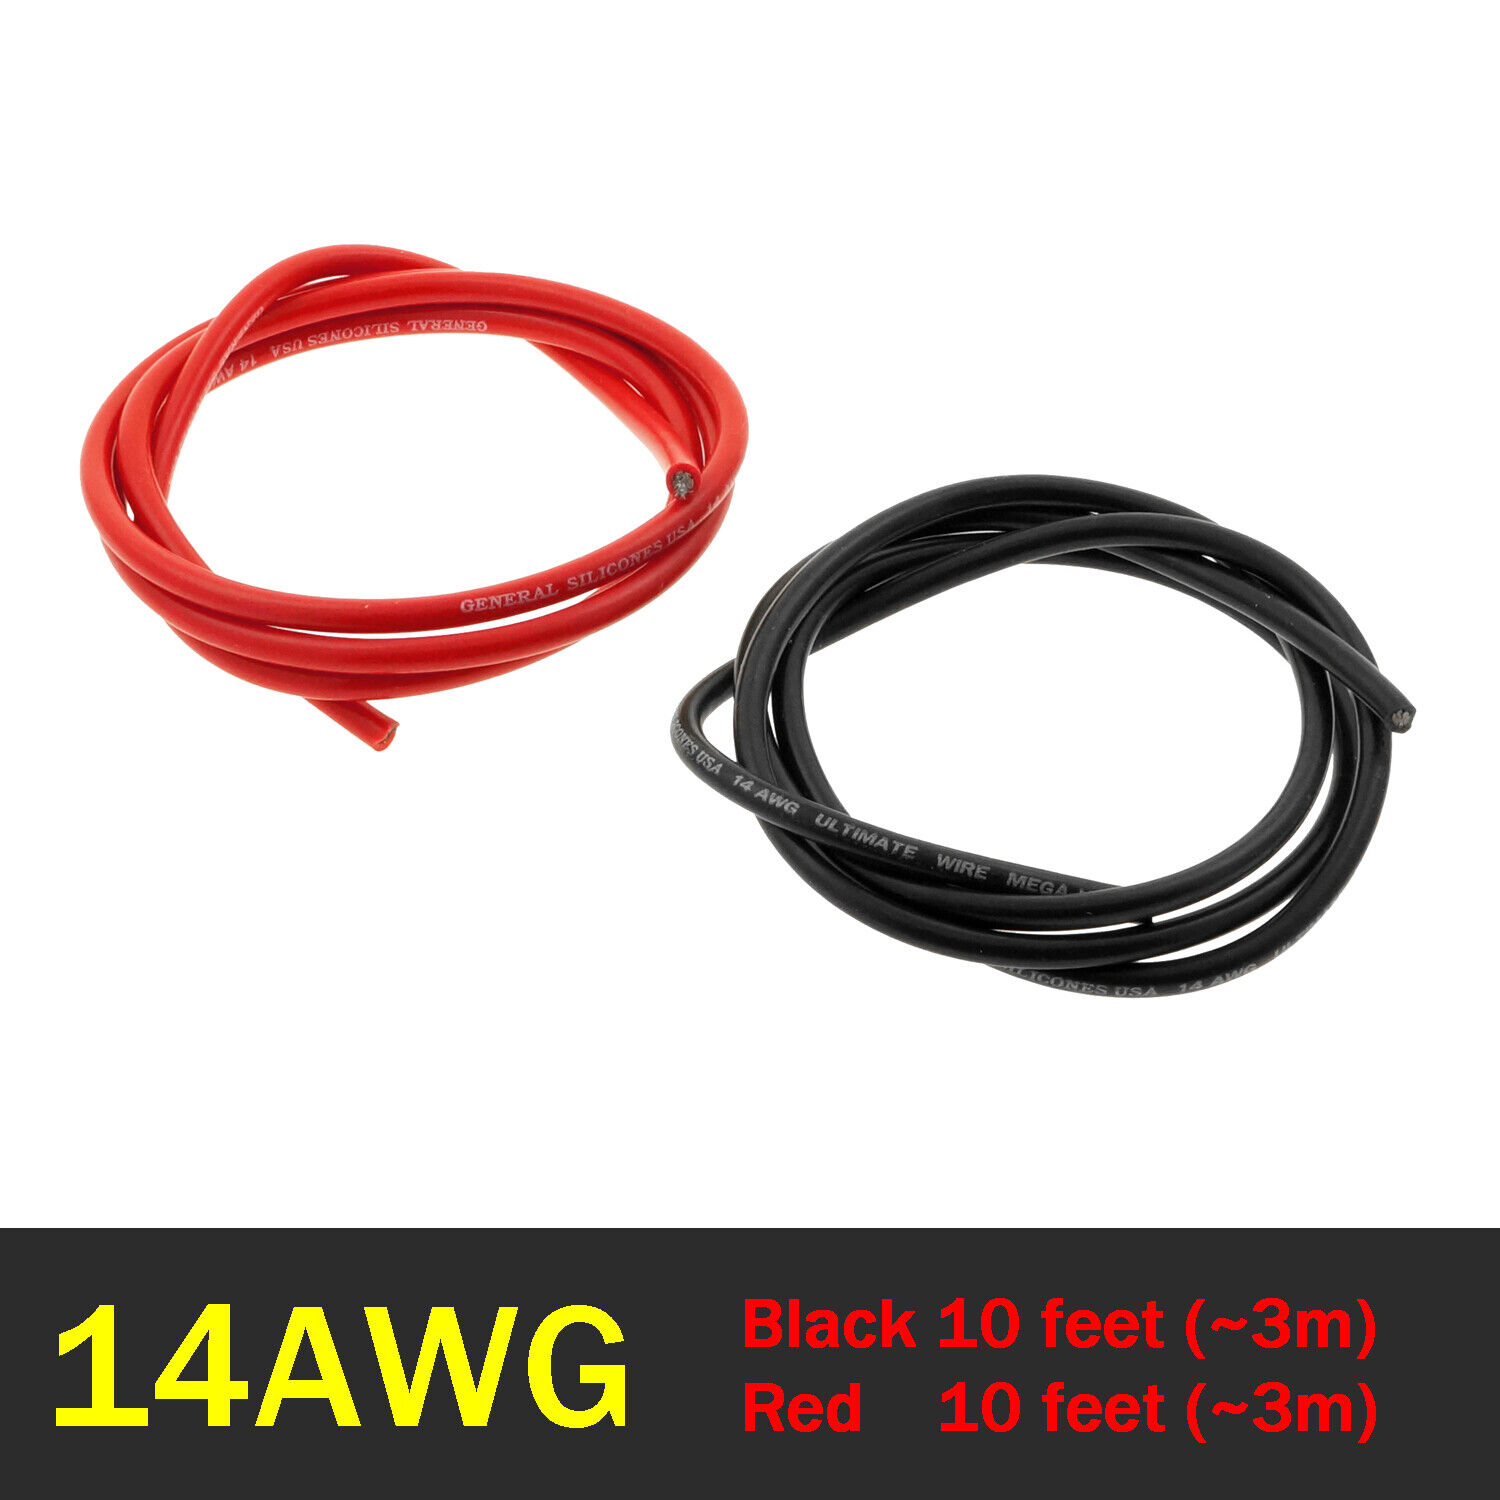 14 AWG 20 Feet (~6m) Gauge Red+Black Silicone Wire Heatproof Flexible RC Cable